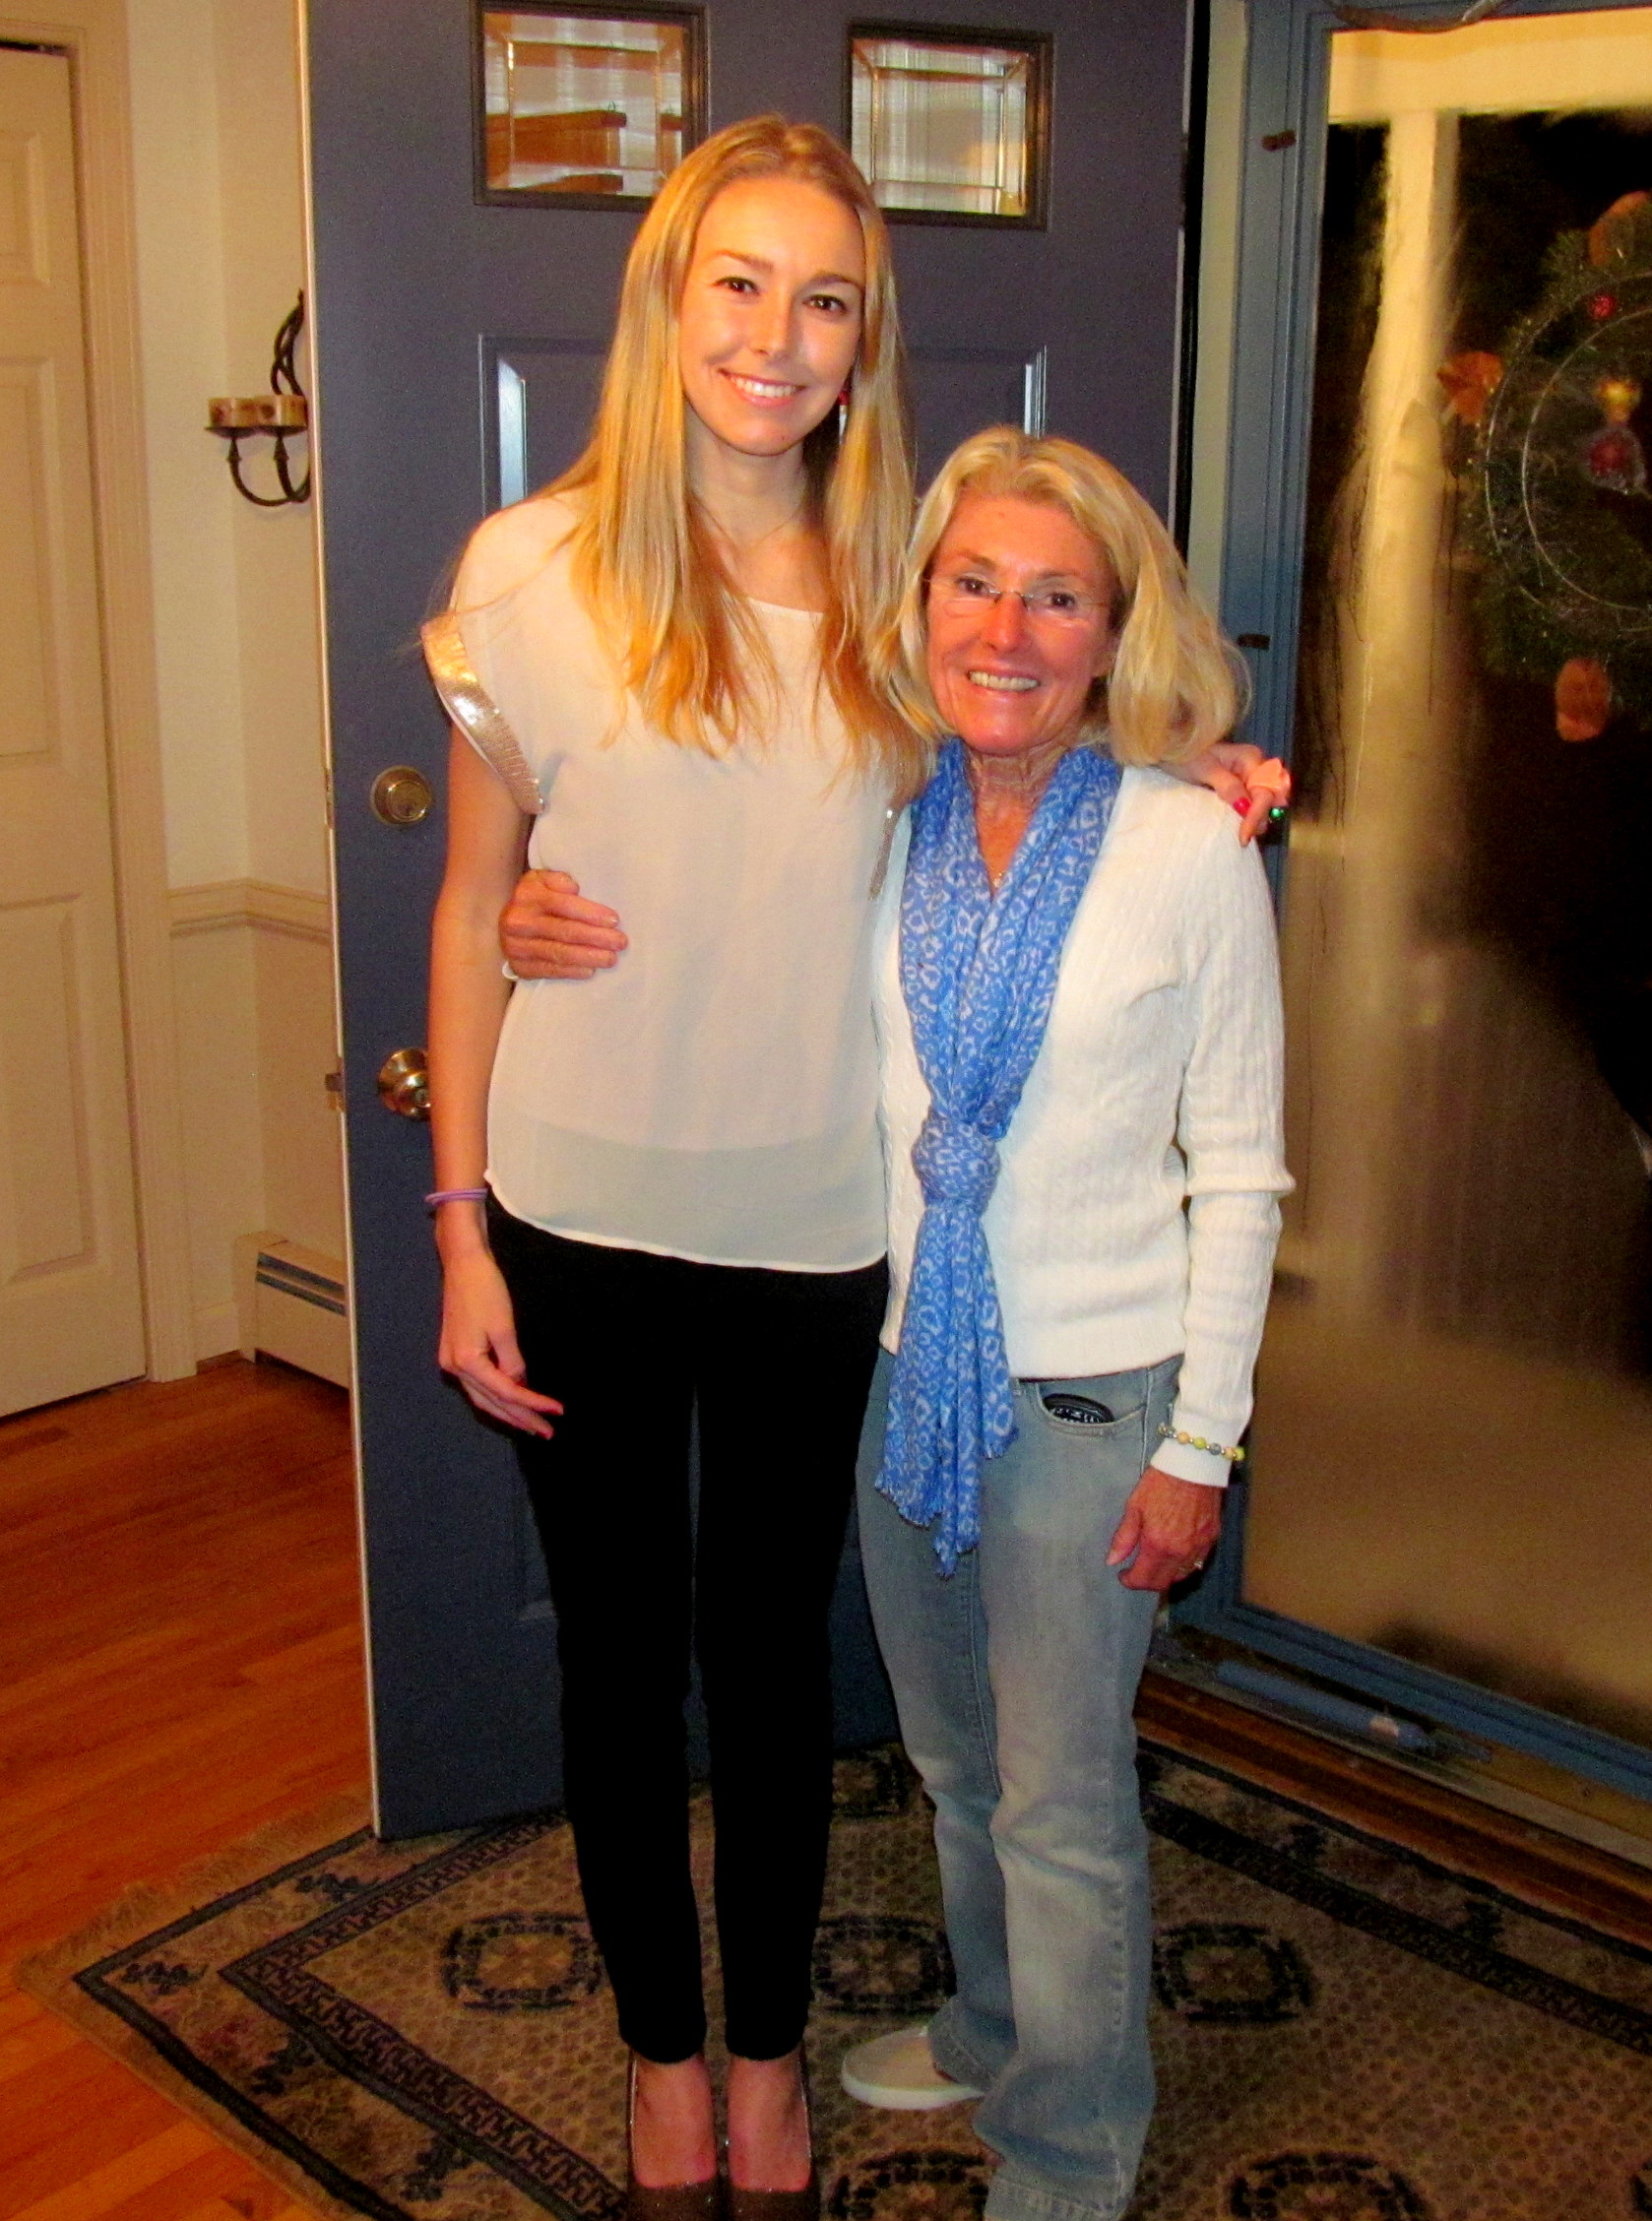 Mom and I at the party - my heels highlight our height difference!